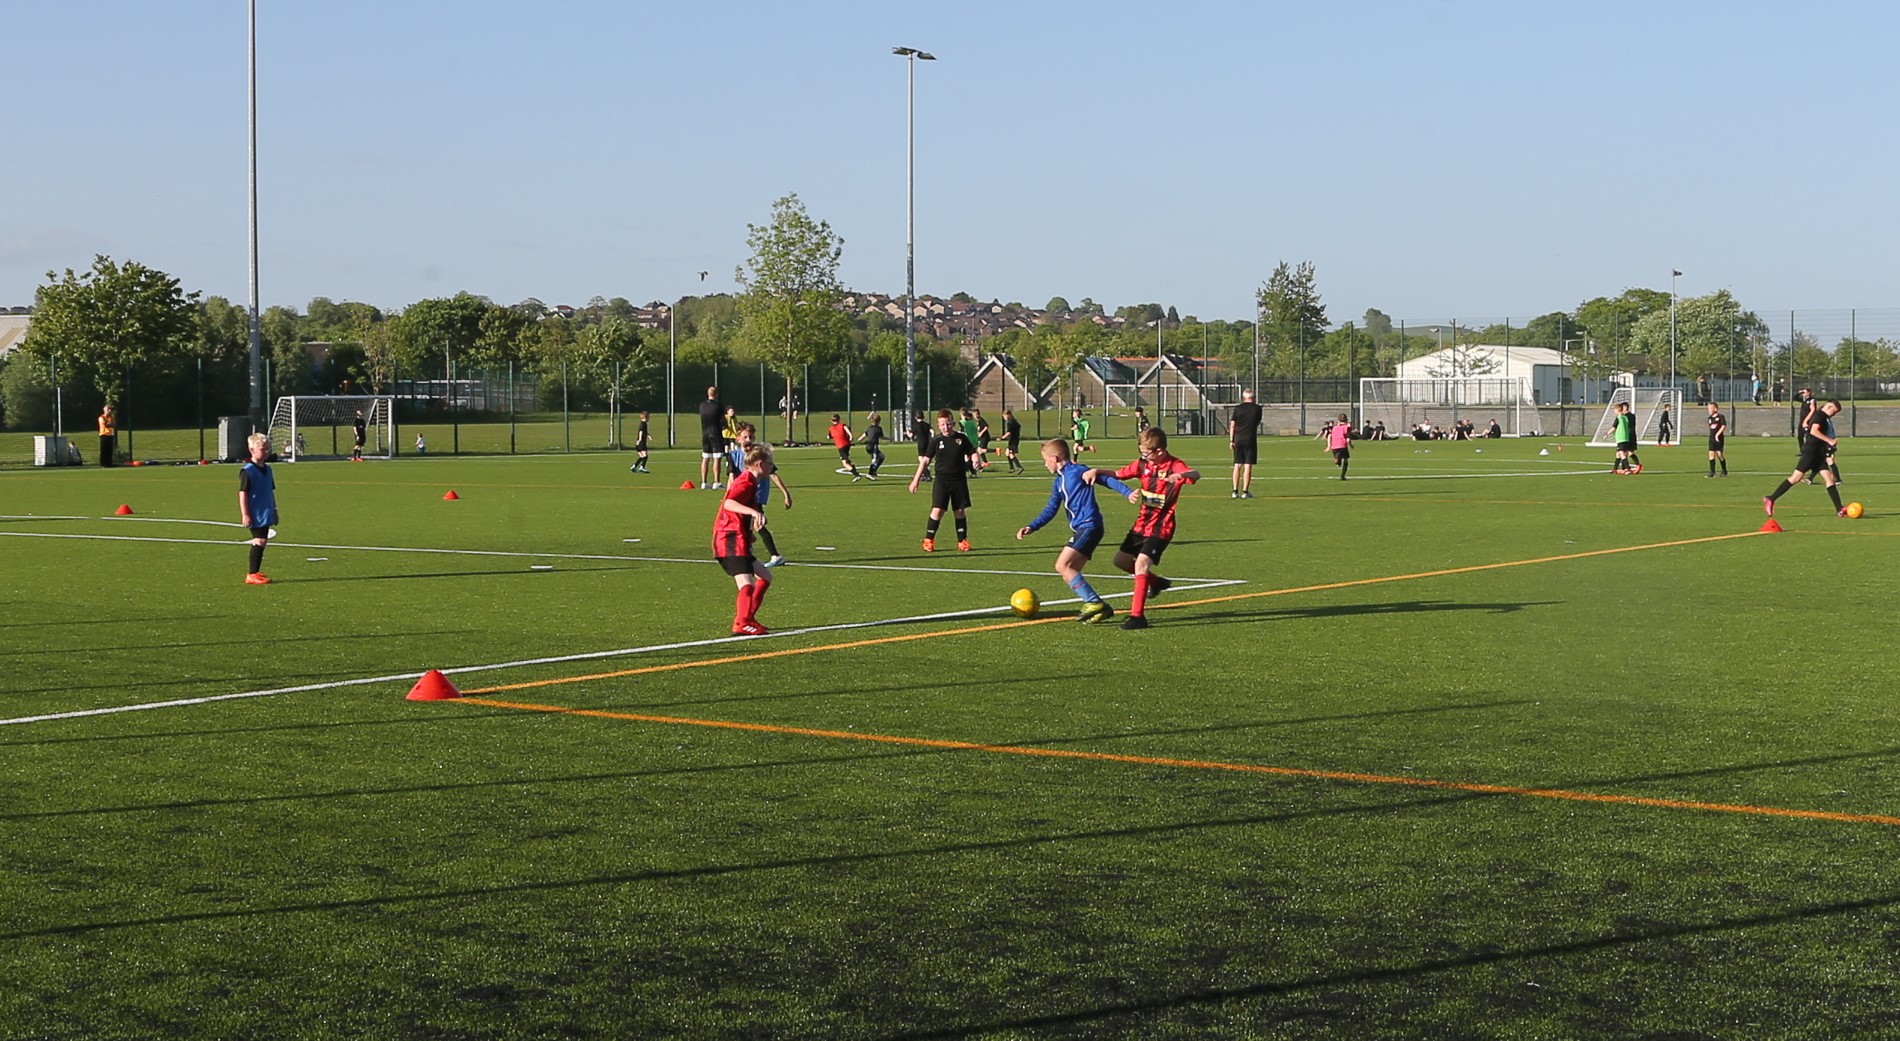 New astro pitch at Dunfermline High School